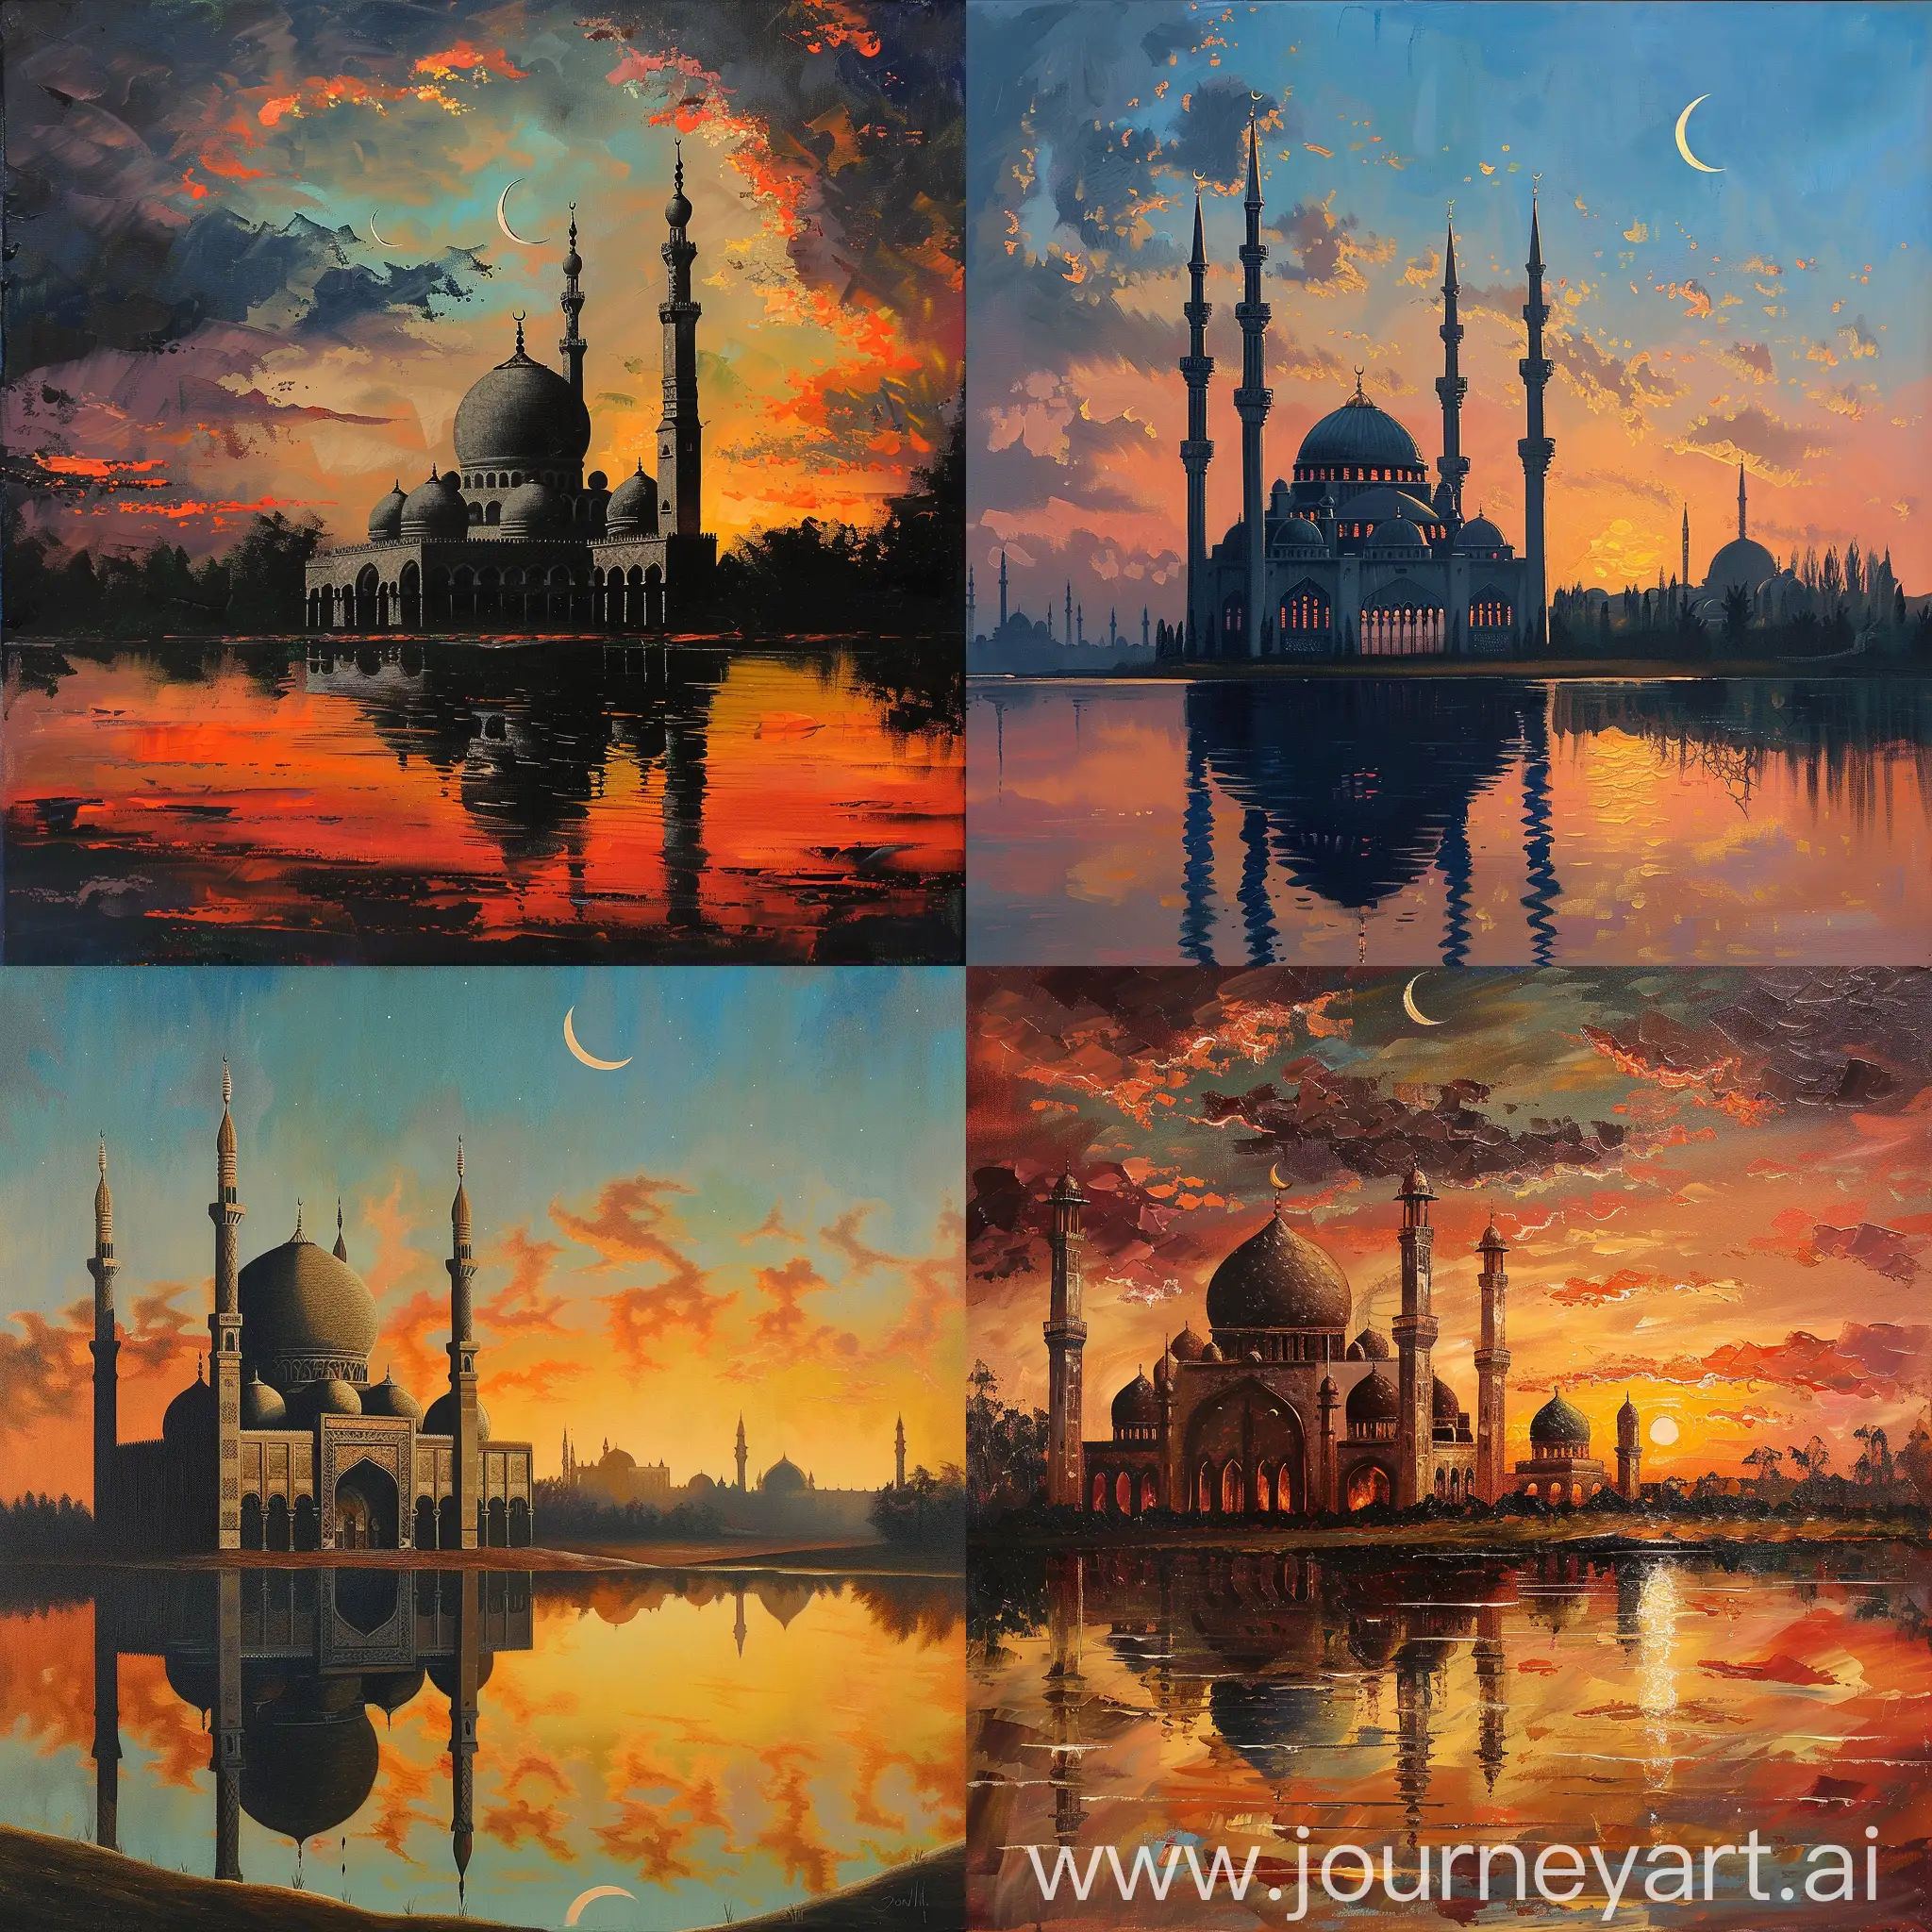 painting of mosque during sunset near a still water body with crescent moon